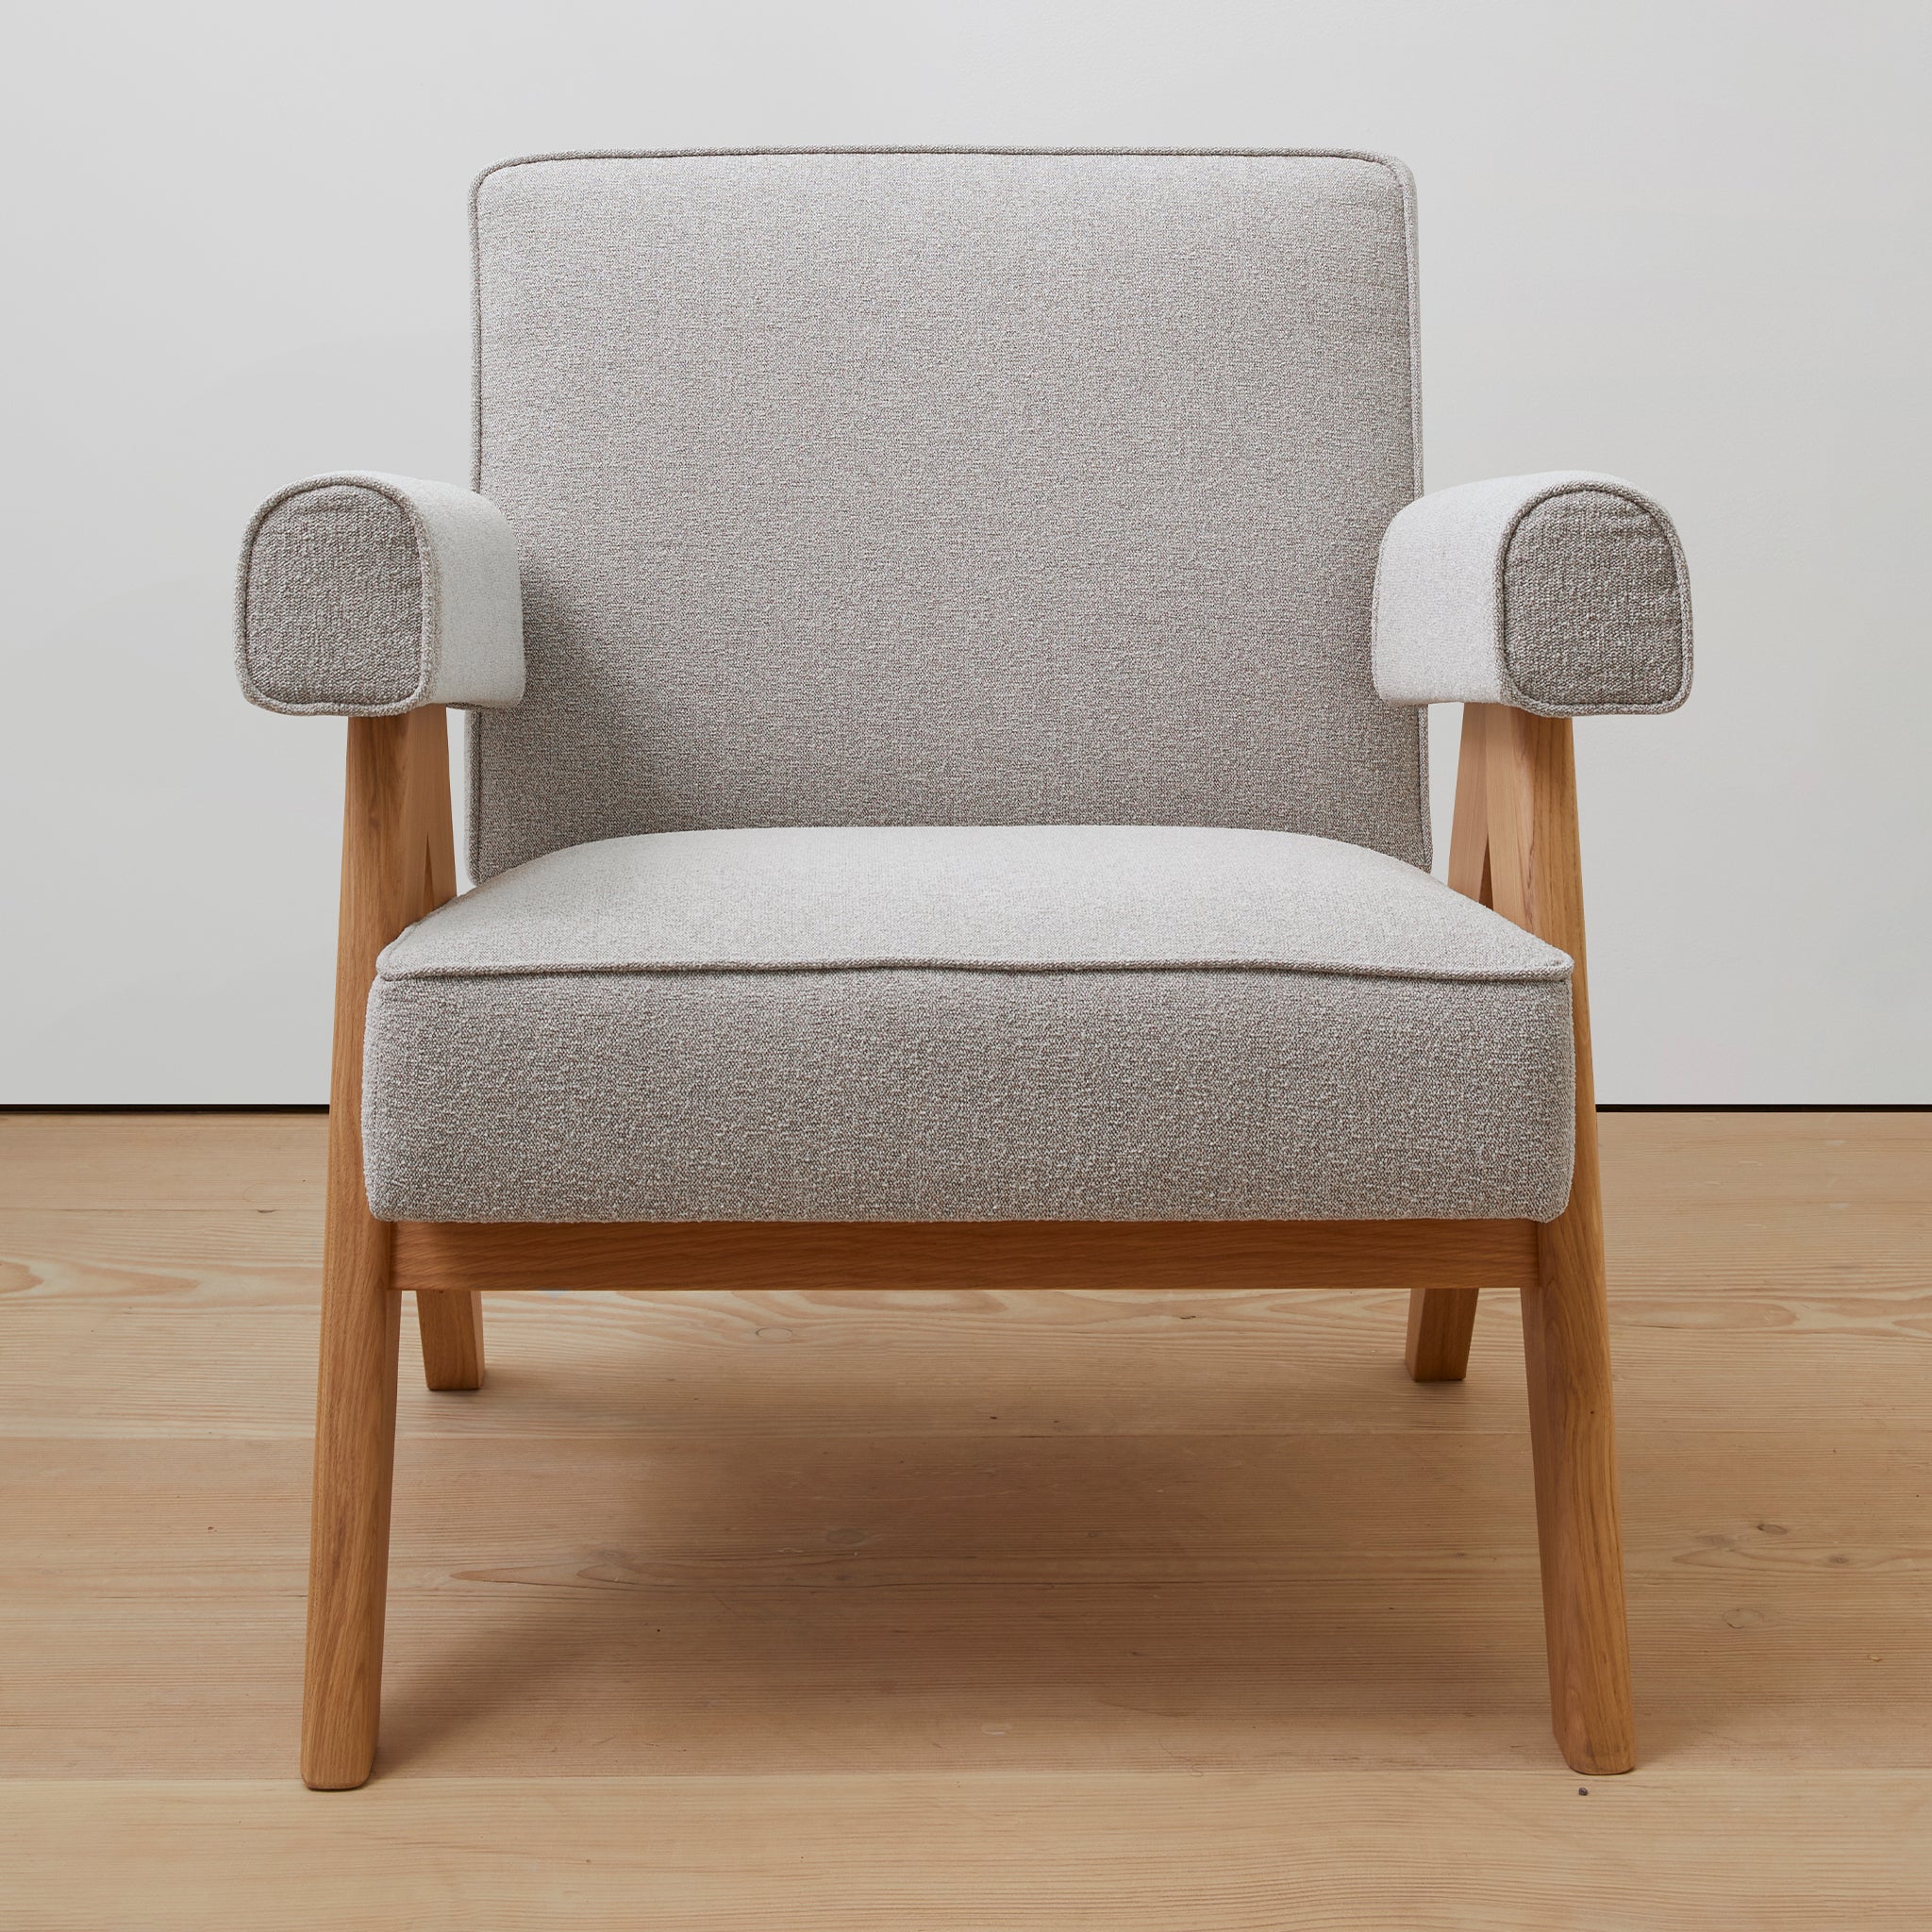 Front view of an authentic chandigarh lounge chair, pierre jeanneret era, natural oak frame, gray boucle upholstery, by Klarel #K35-37